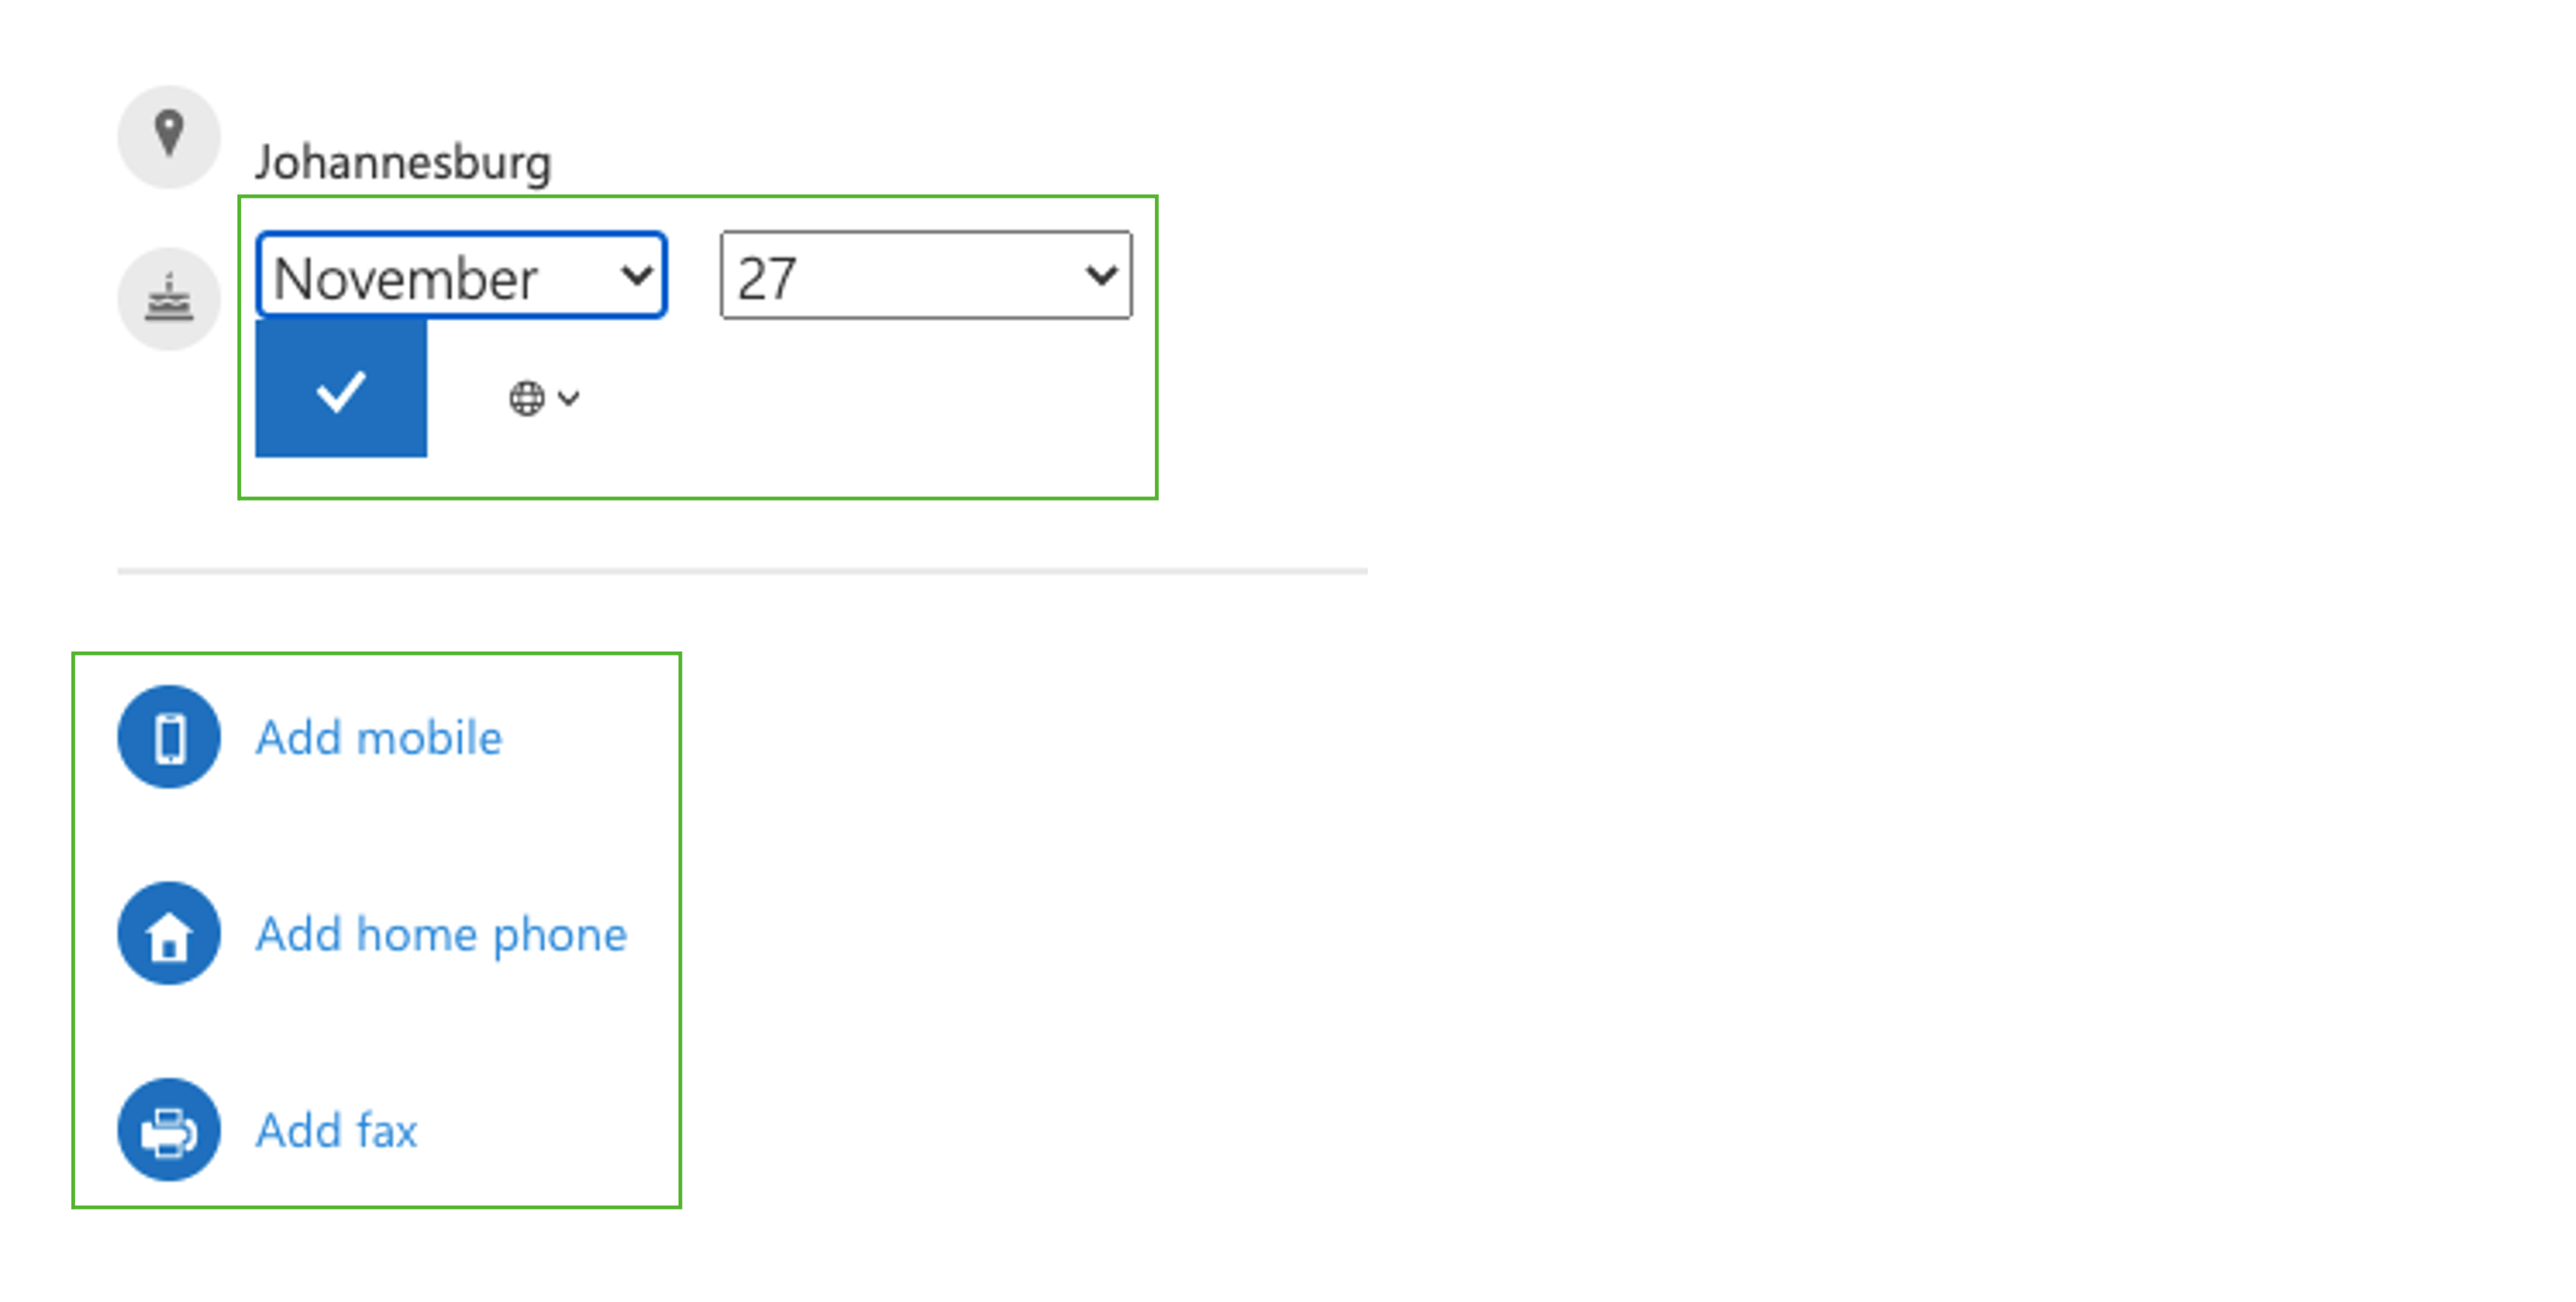 Microsoft Delve birthdate and mobile number section